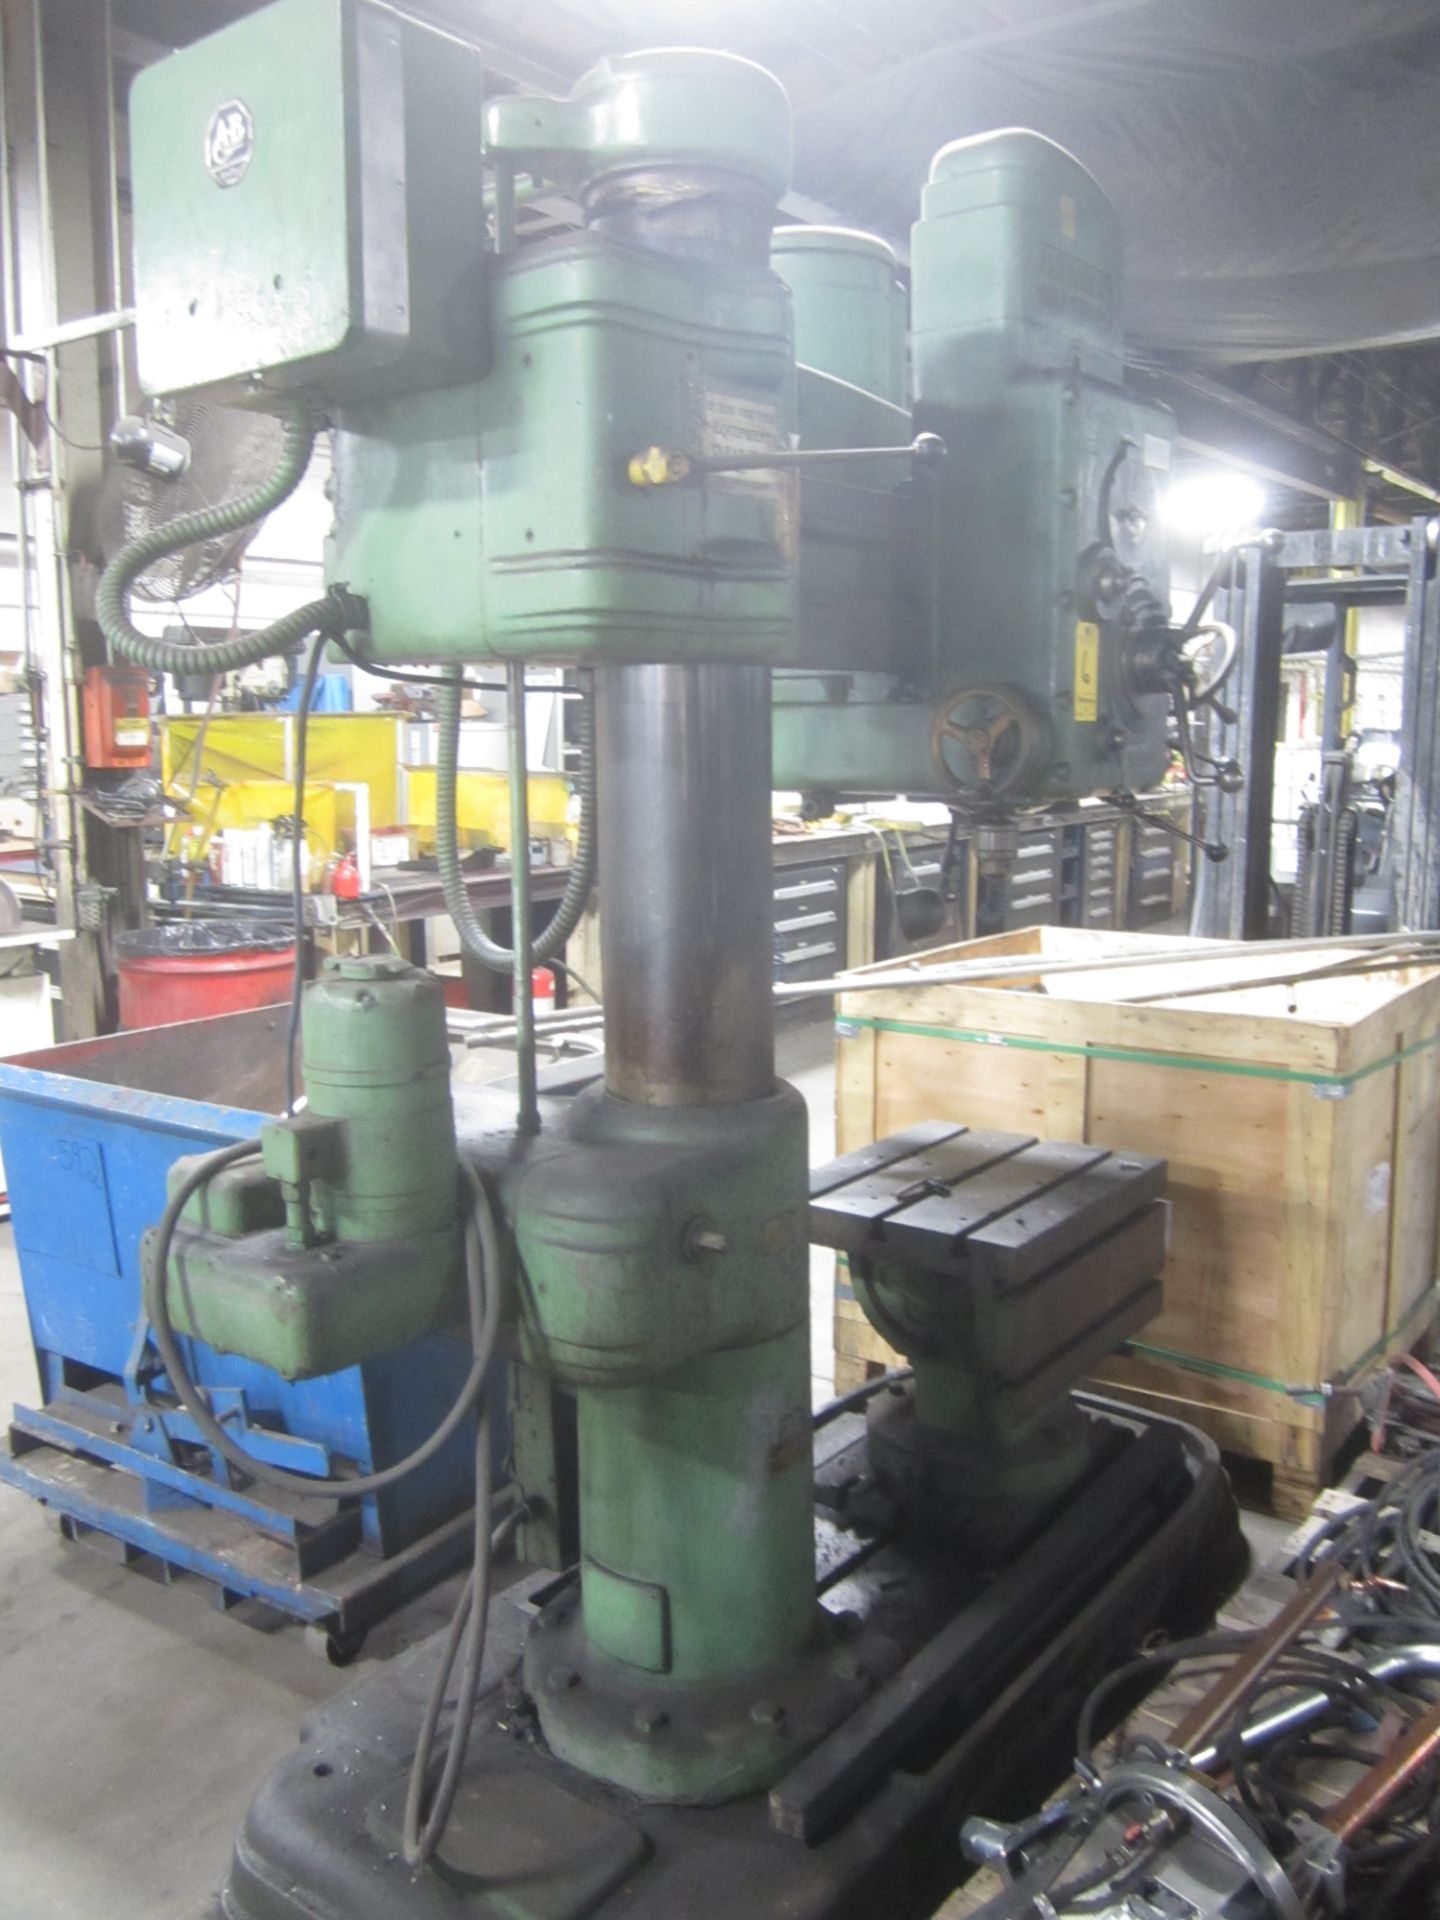 American Hole Wizard Radial Arm Drill, 3’ X 9”, Power Clamping, Box Table, s/n 73577 - Image 4 of 5